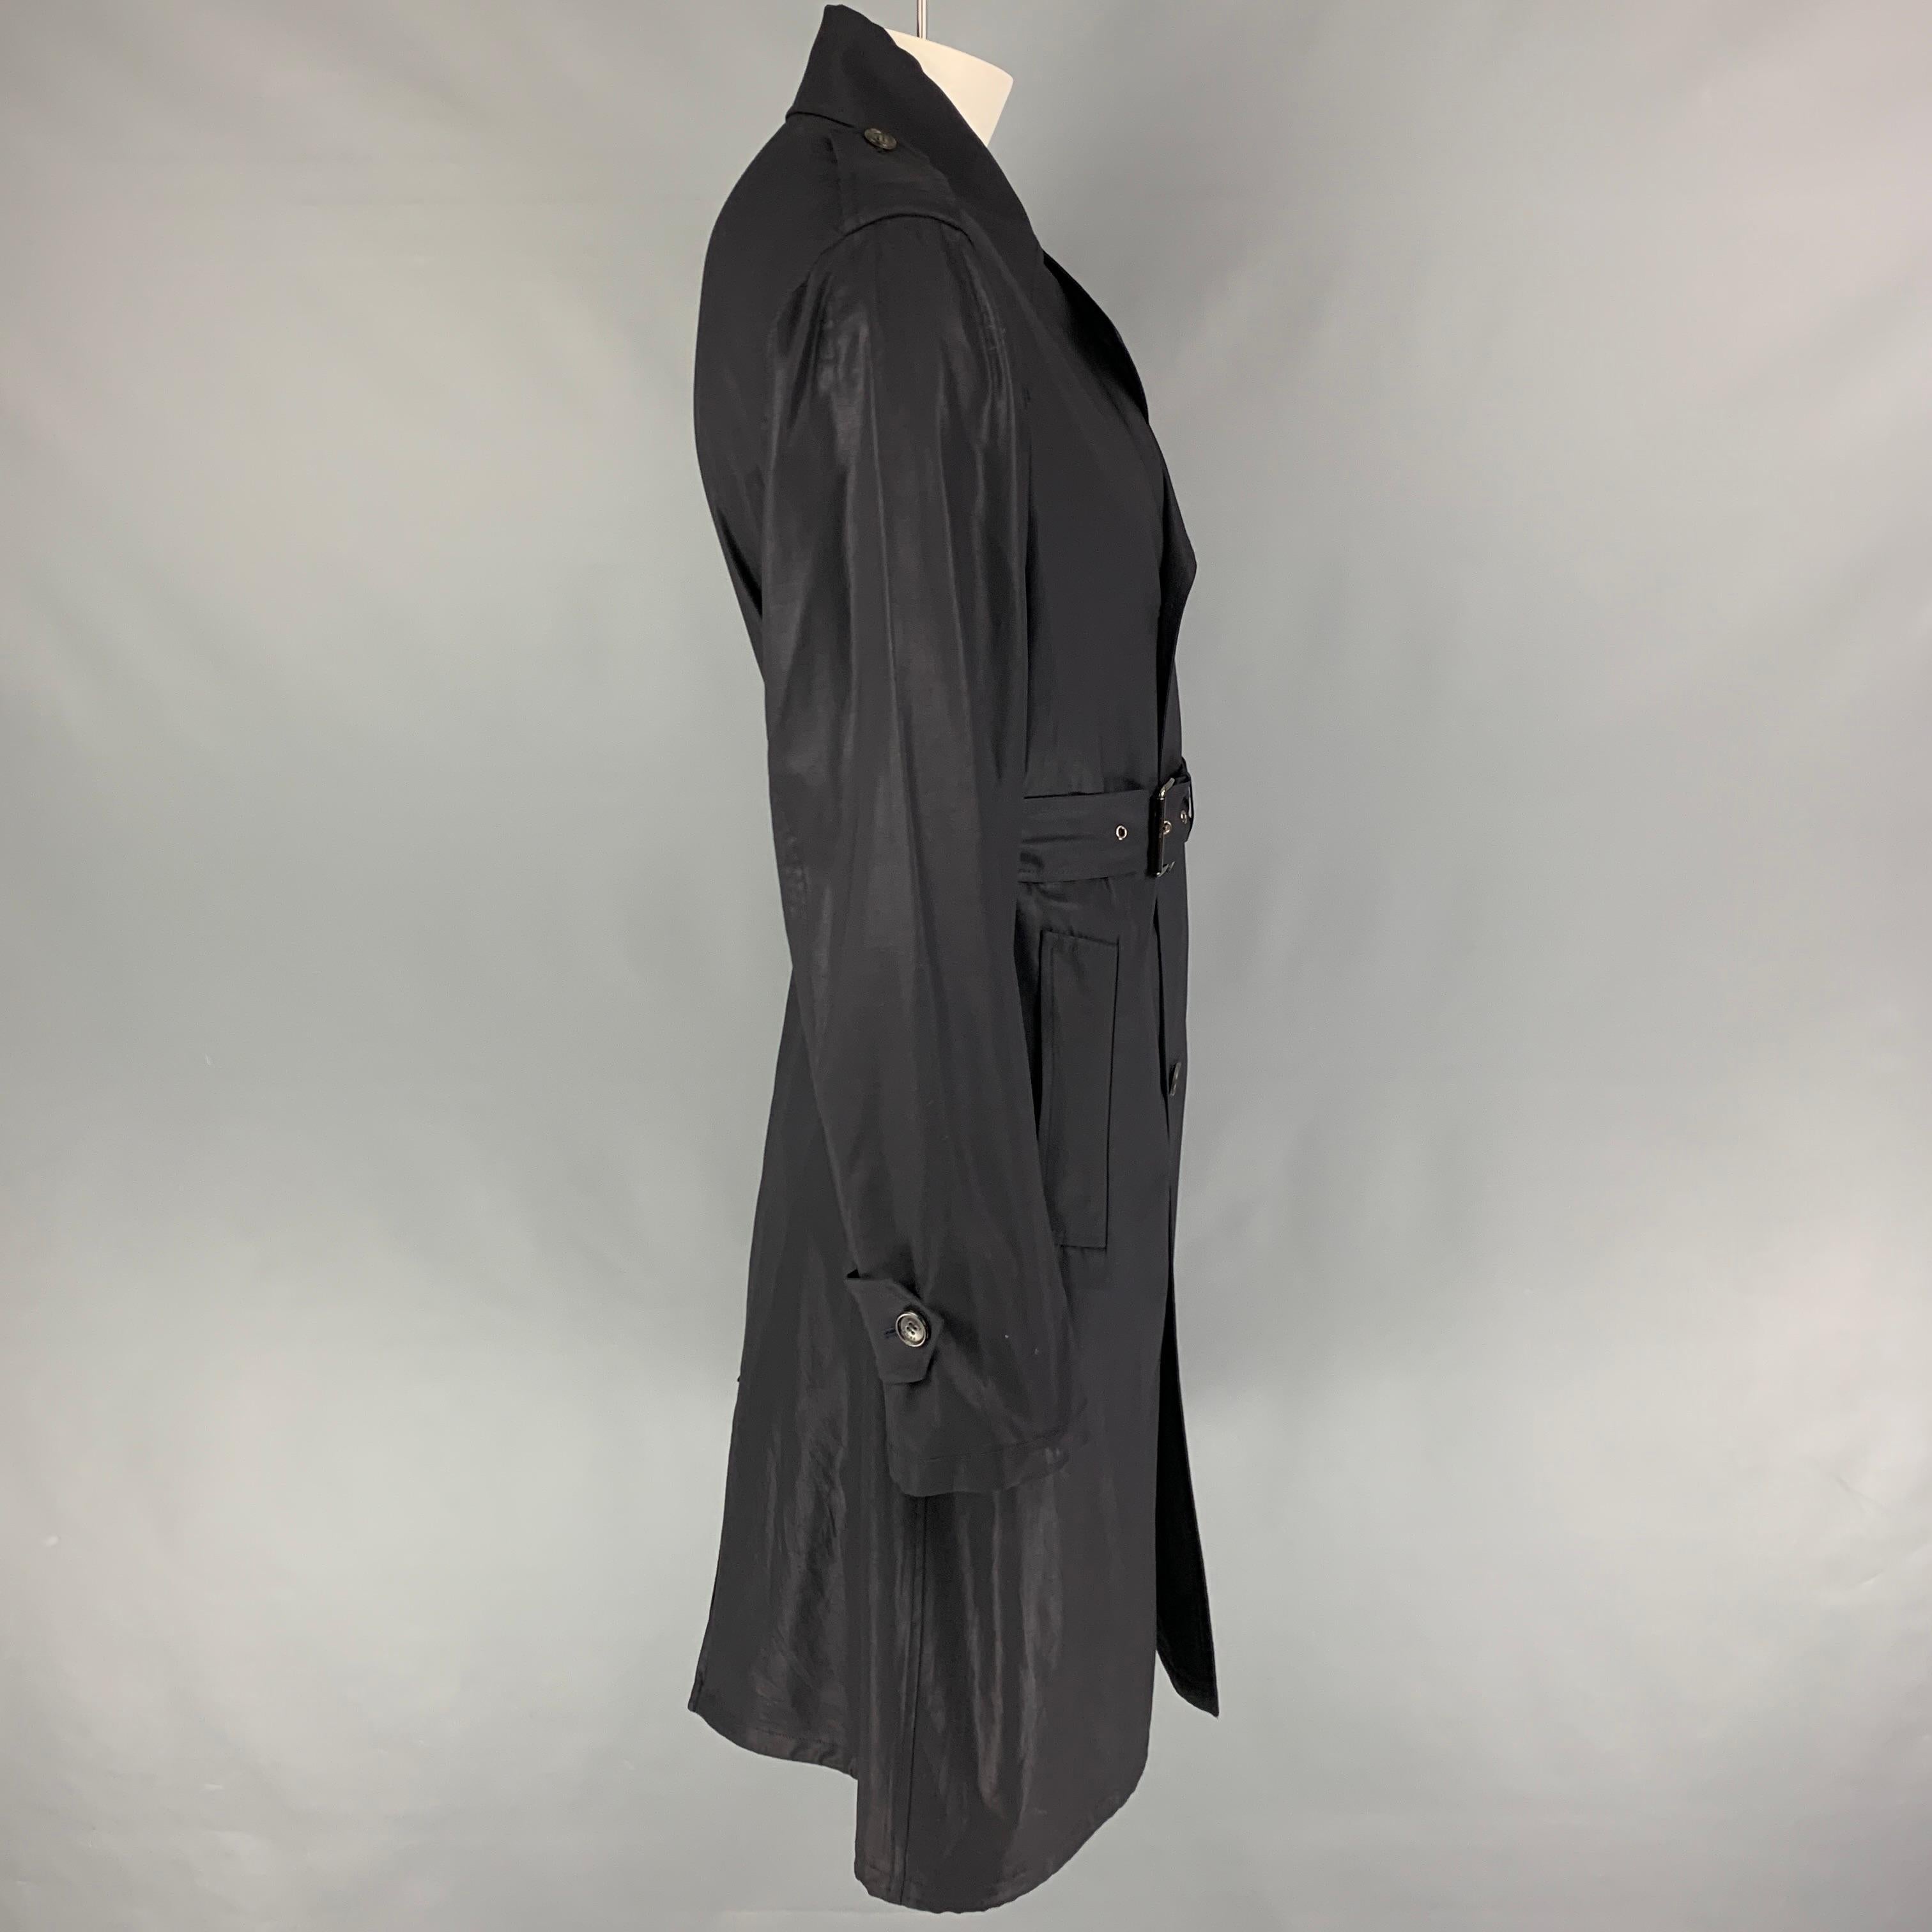 PRADA trench coat comes in a navy material with a full liner featuring a belted style, notch lapel, epaulettes, slit pockets, and a double breasted closure. Made in Italy. 

Very Good Pre-Owned Condition. Fabric tag removed.
Marked: Size tag